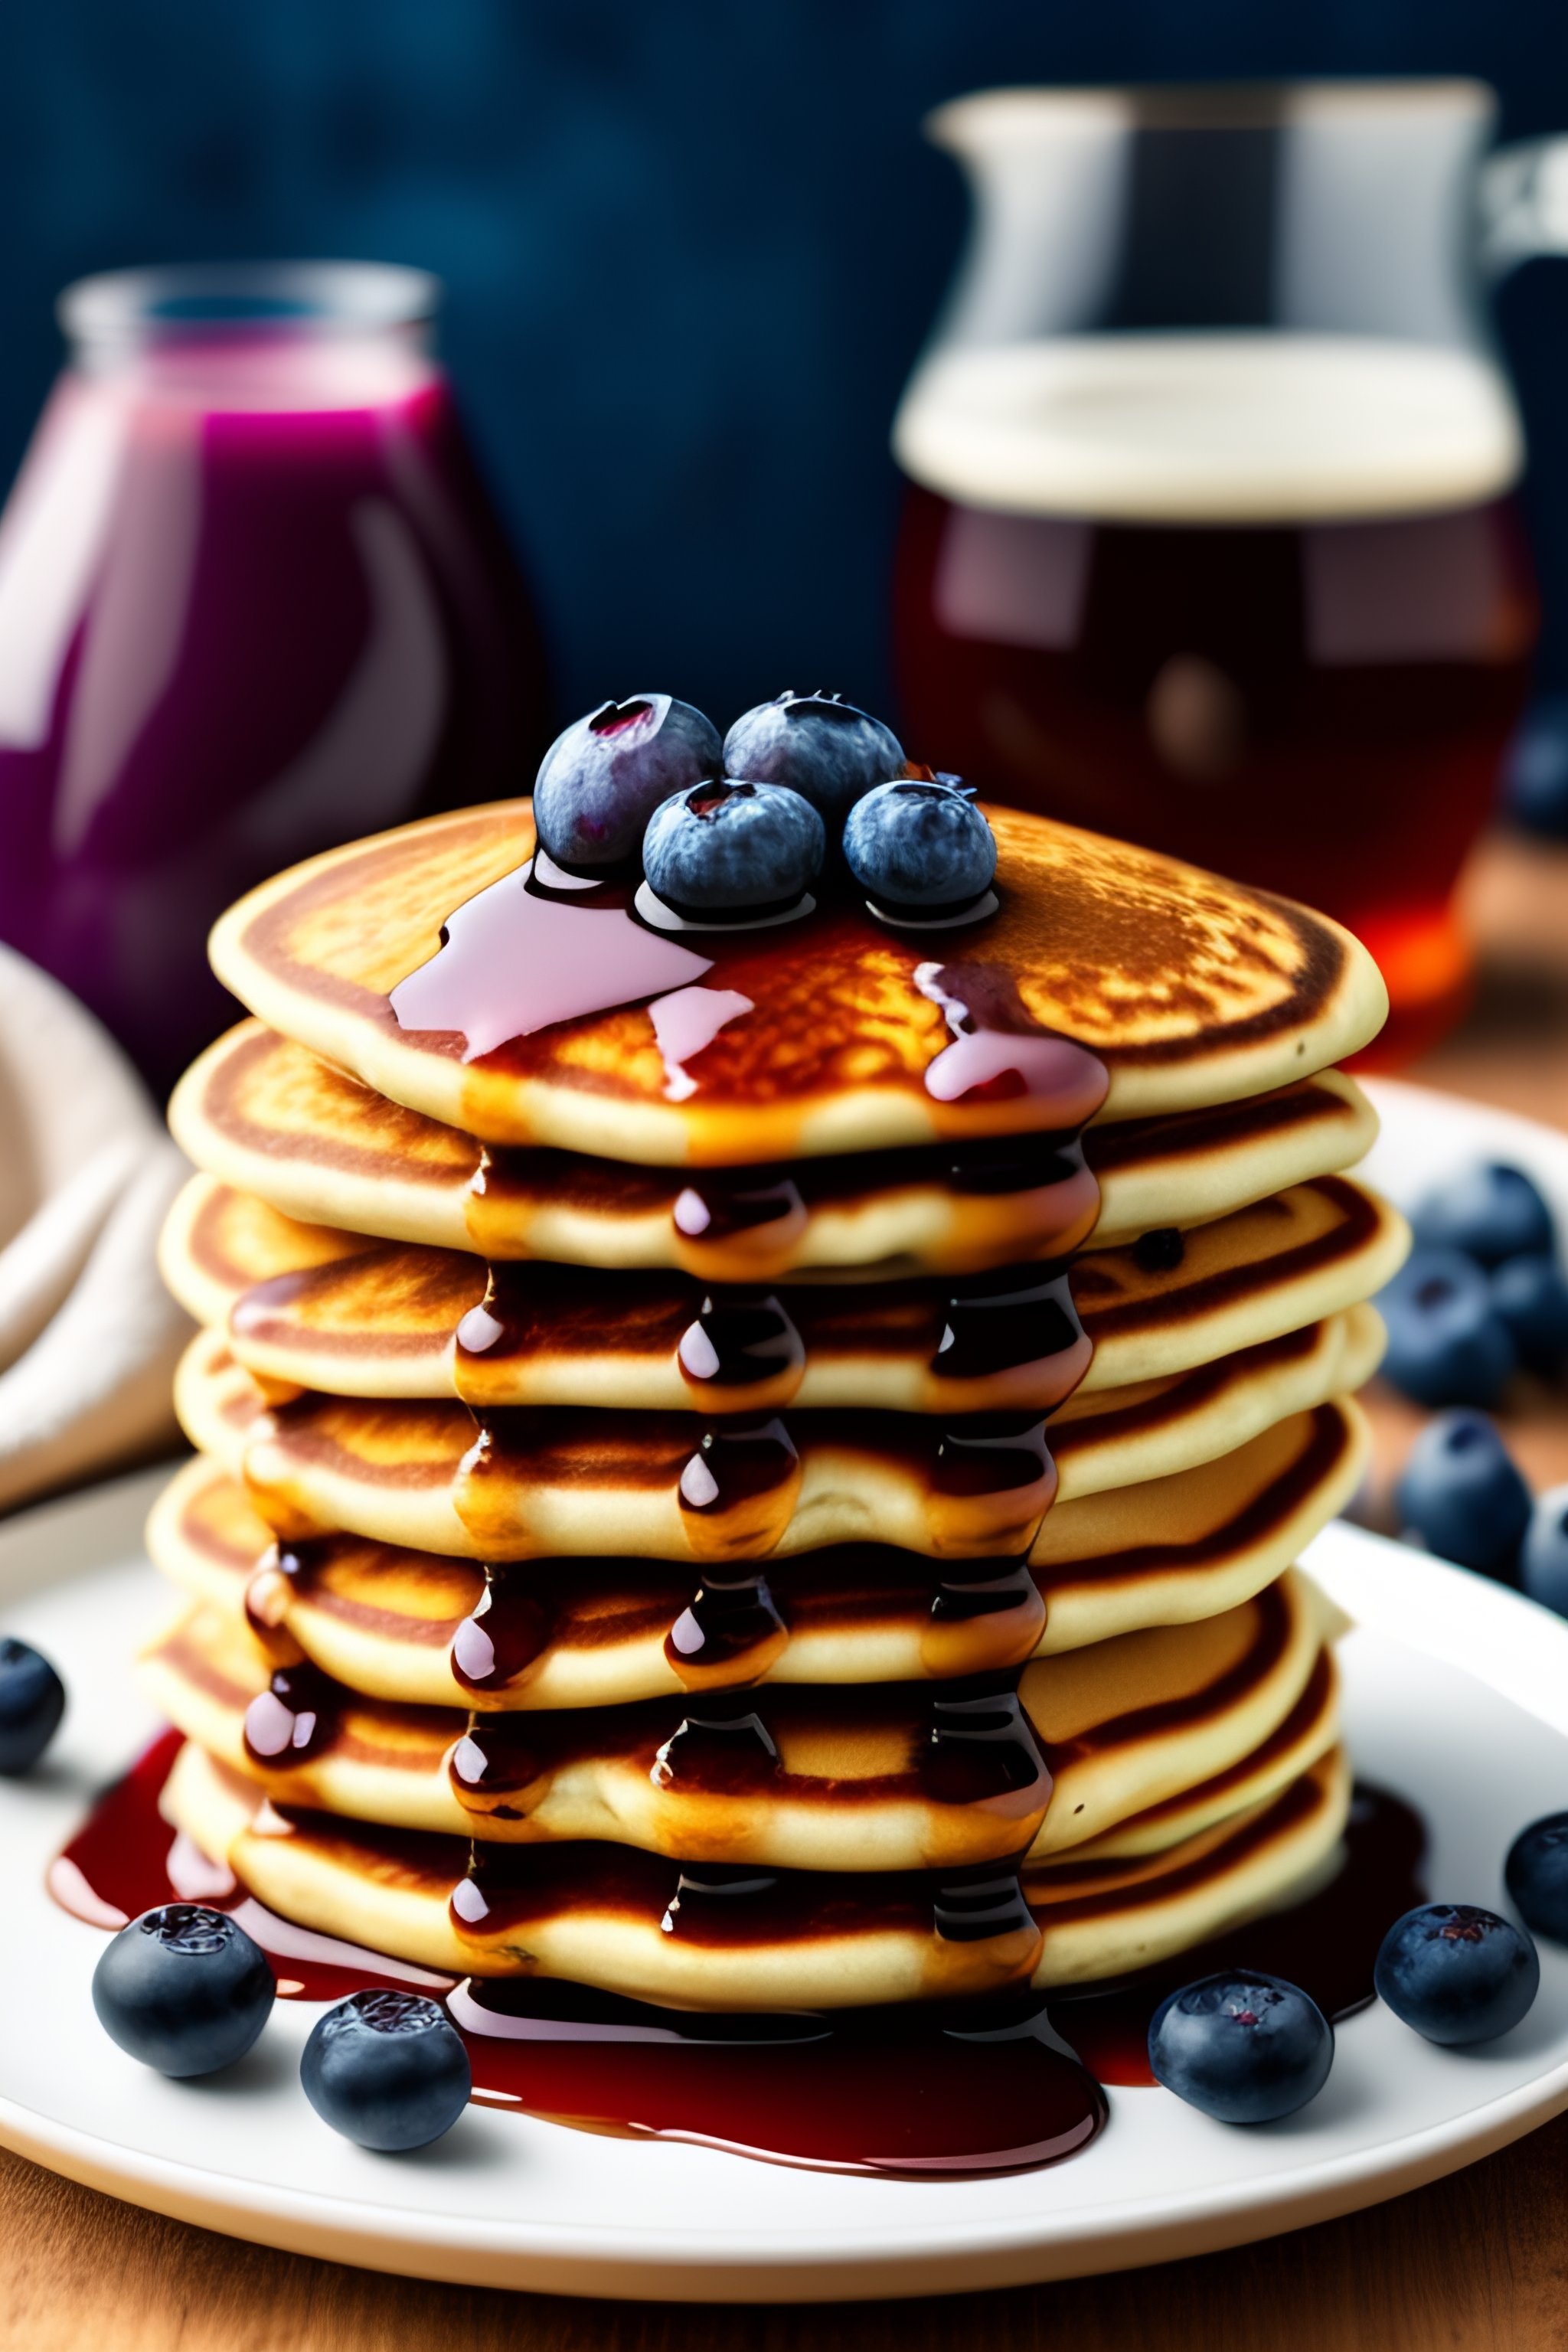 Lexica - A stack of blueberry pancakes, food photography